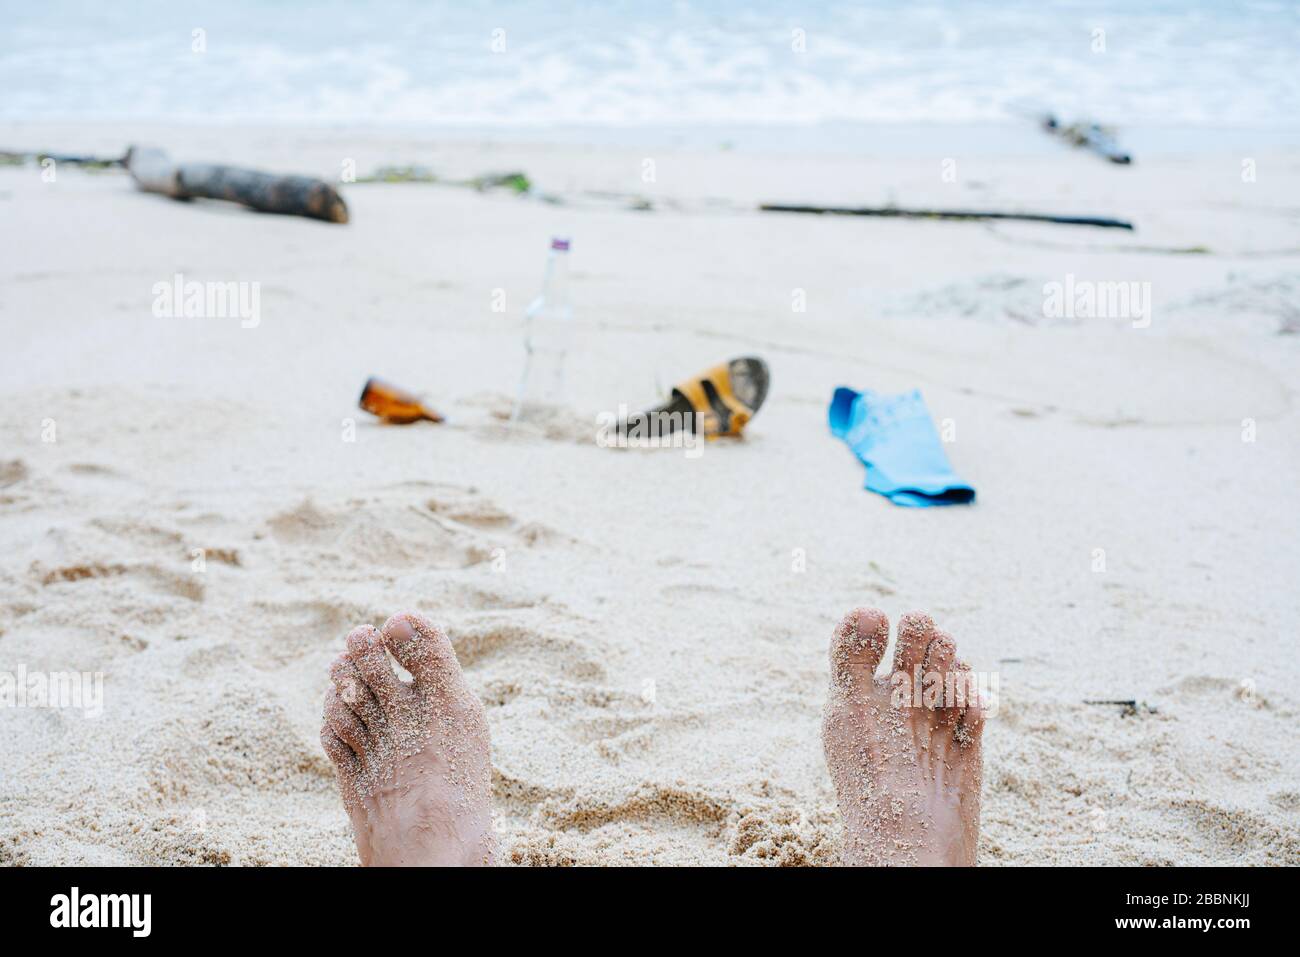 Point of view photo of person's feet and garbage on beach sand of an ocean shore Stock Photo